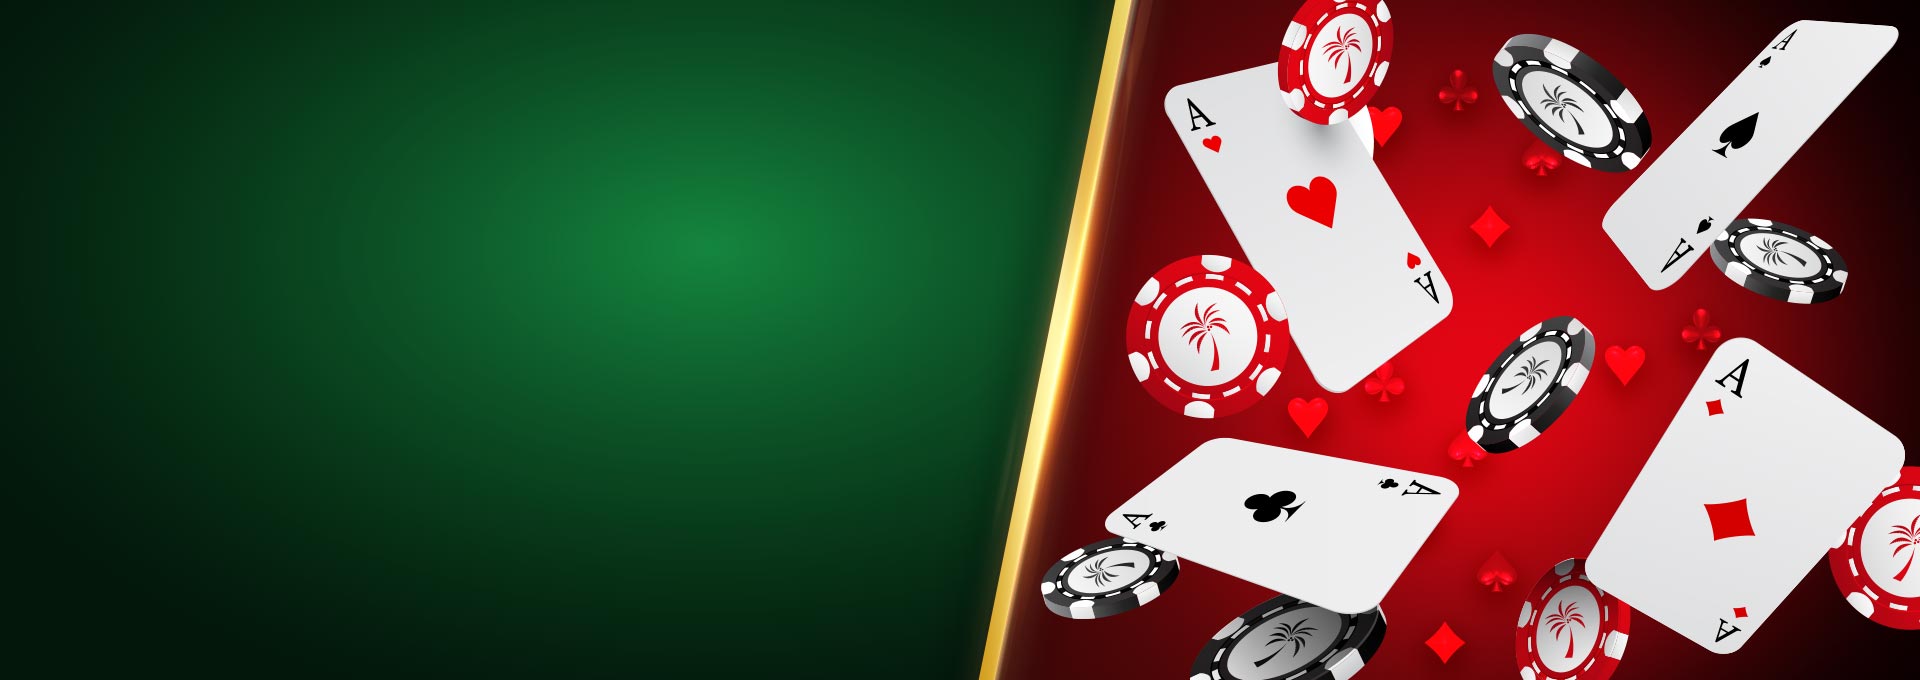 Access rich information that will get you started right now in online poker